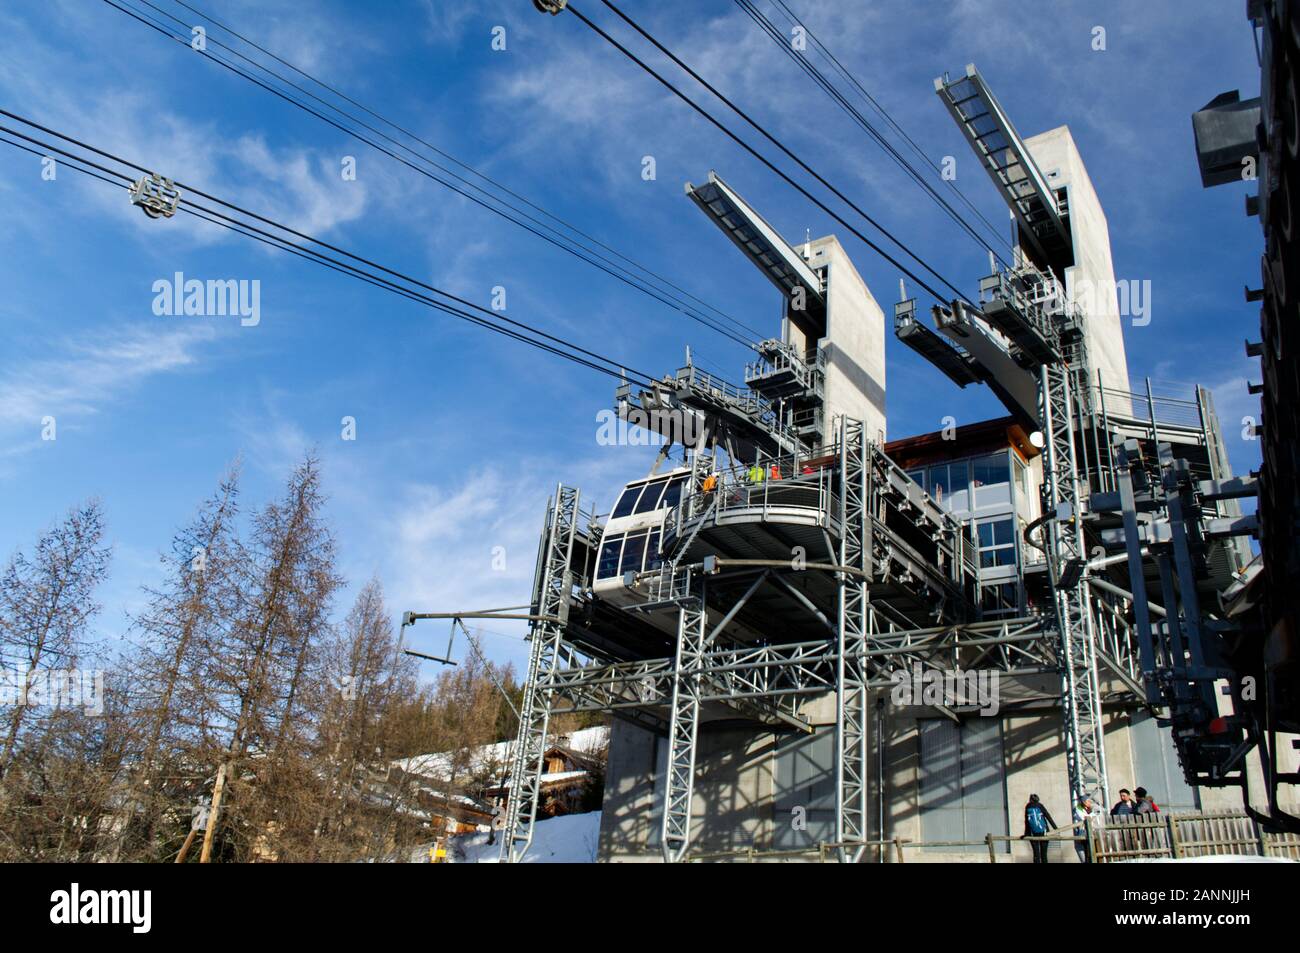 The cable car station of the Vanoise Express on the Peisey Vallandry / Les Arcs side of the crossing. Stock Photo